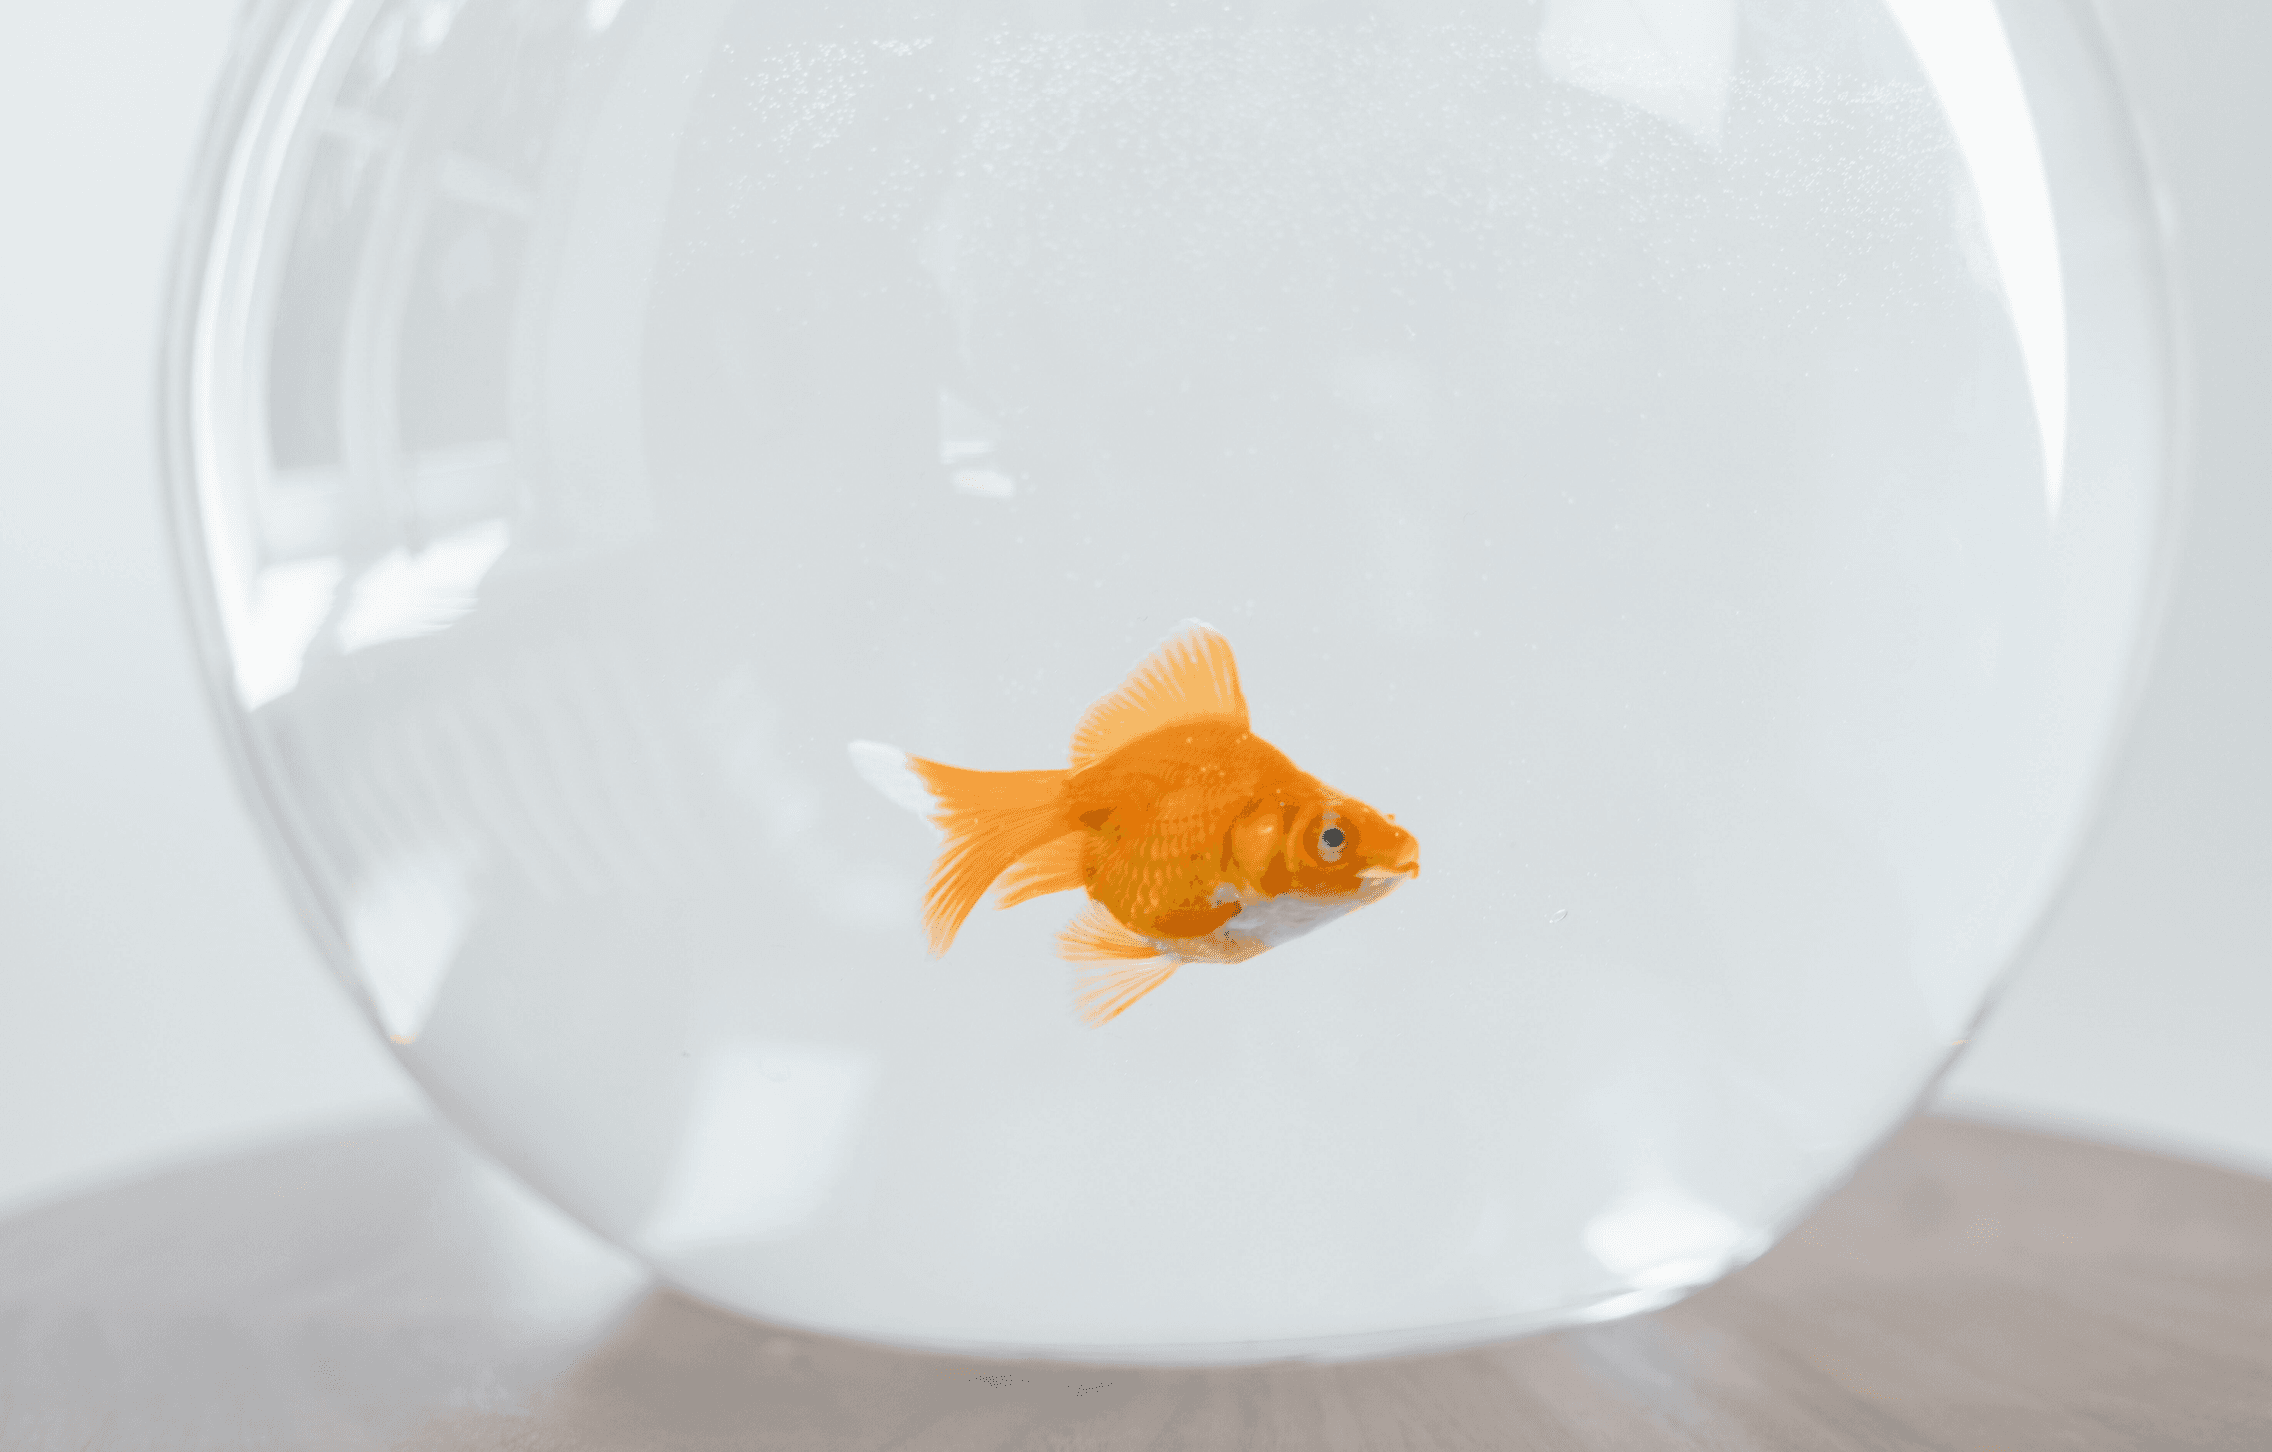 Why Does Tap Water Kill Goldfish?